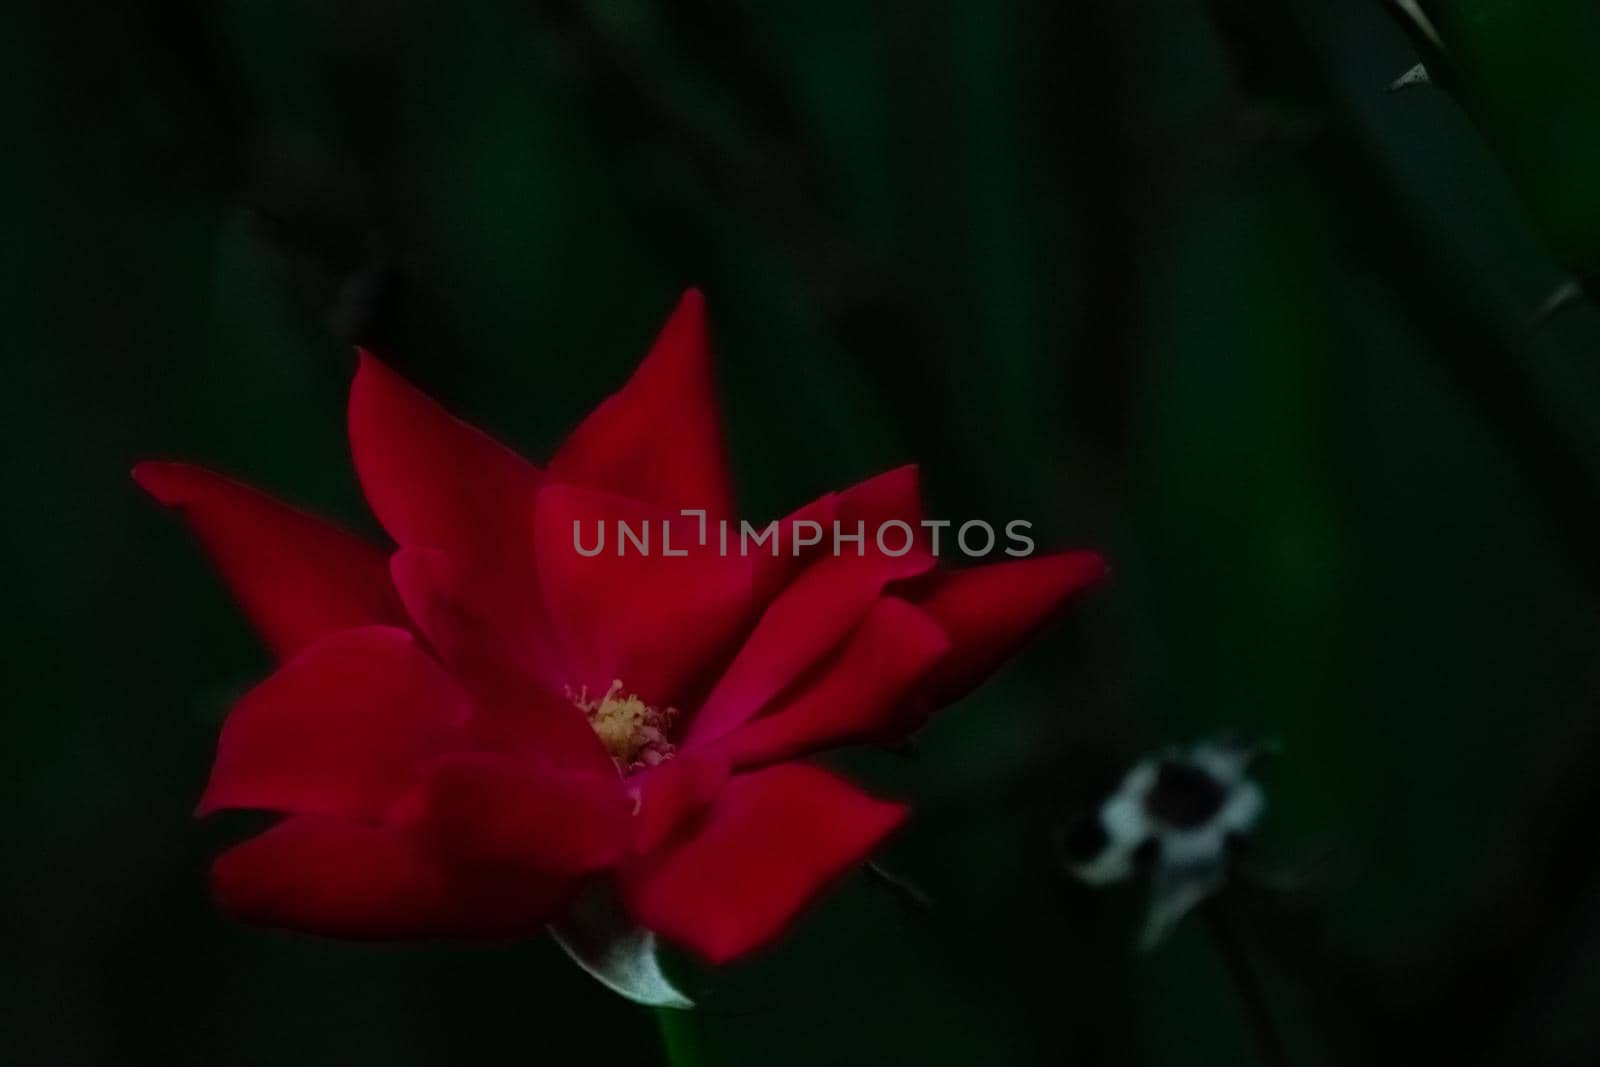 A Bright Red Rose on Dark Green by bju12290